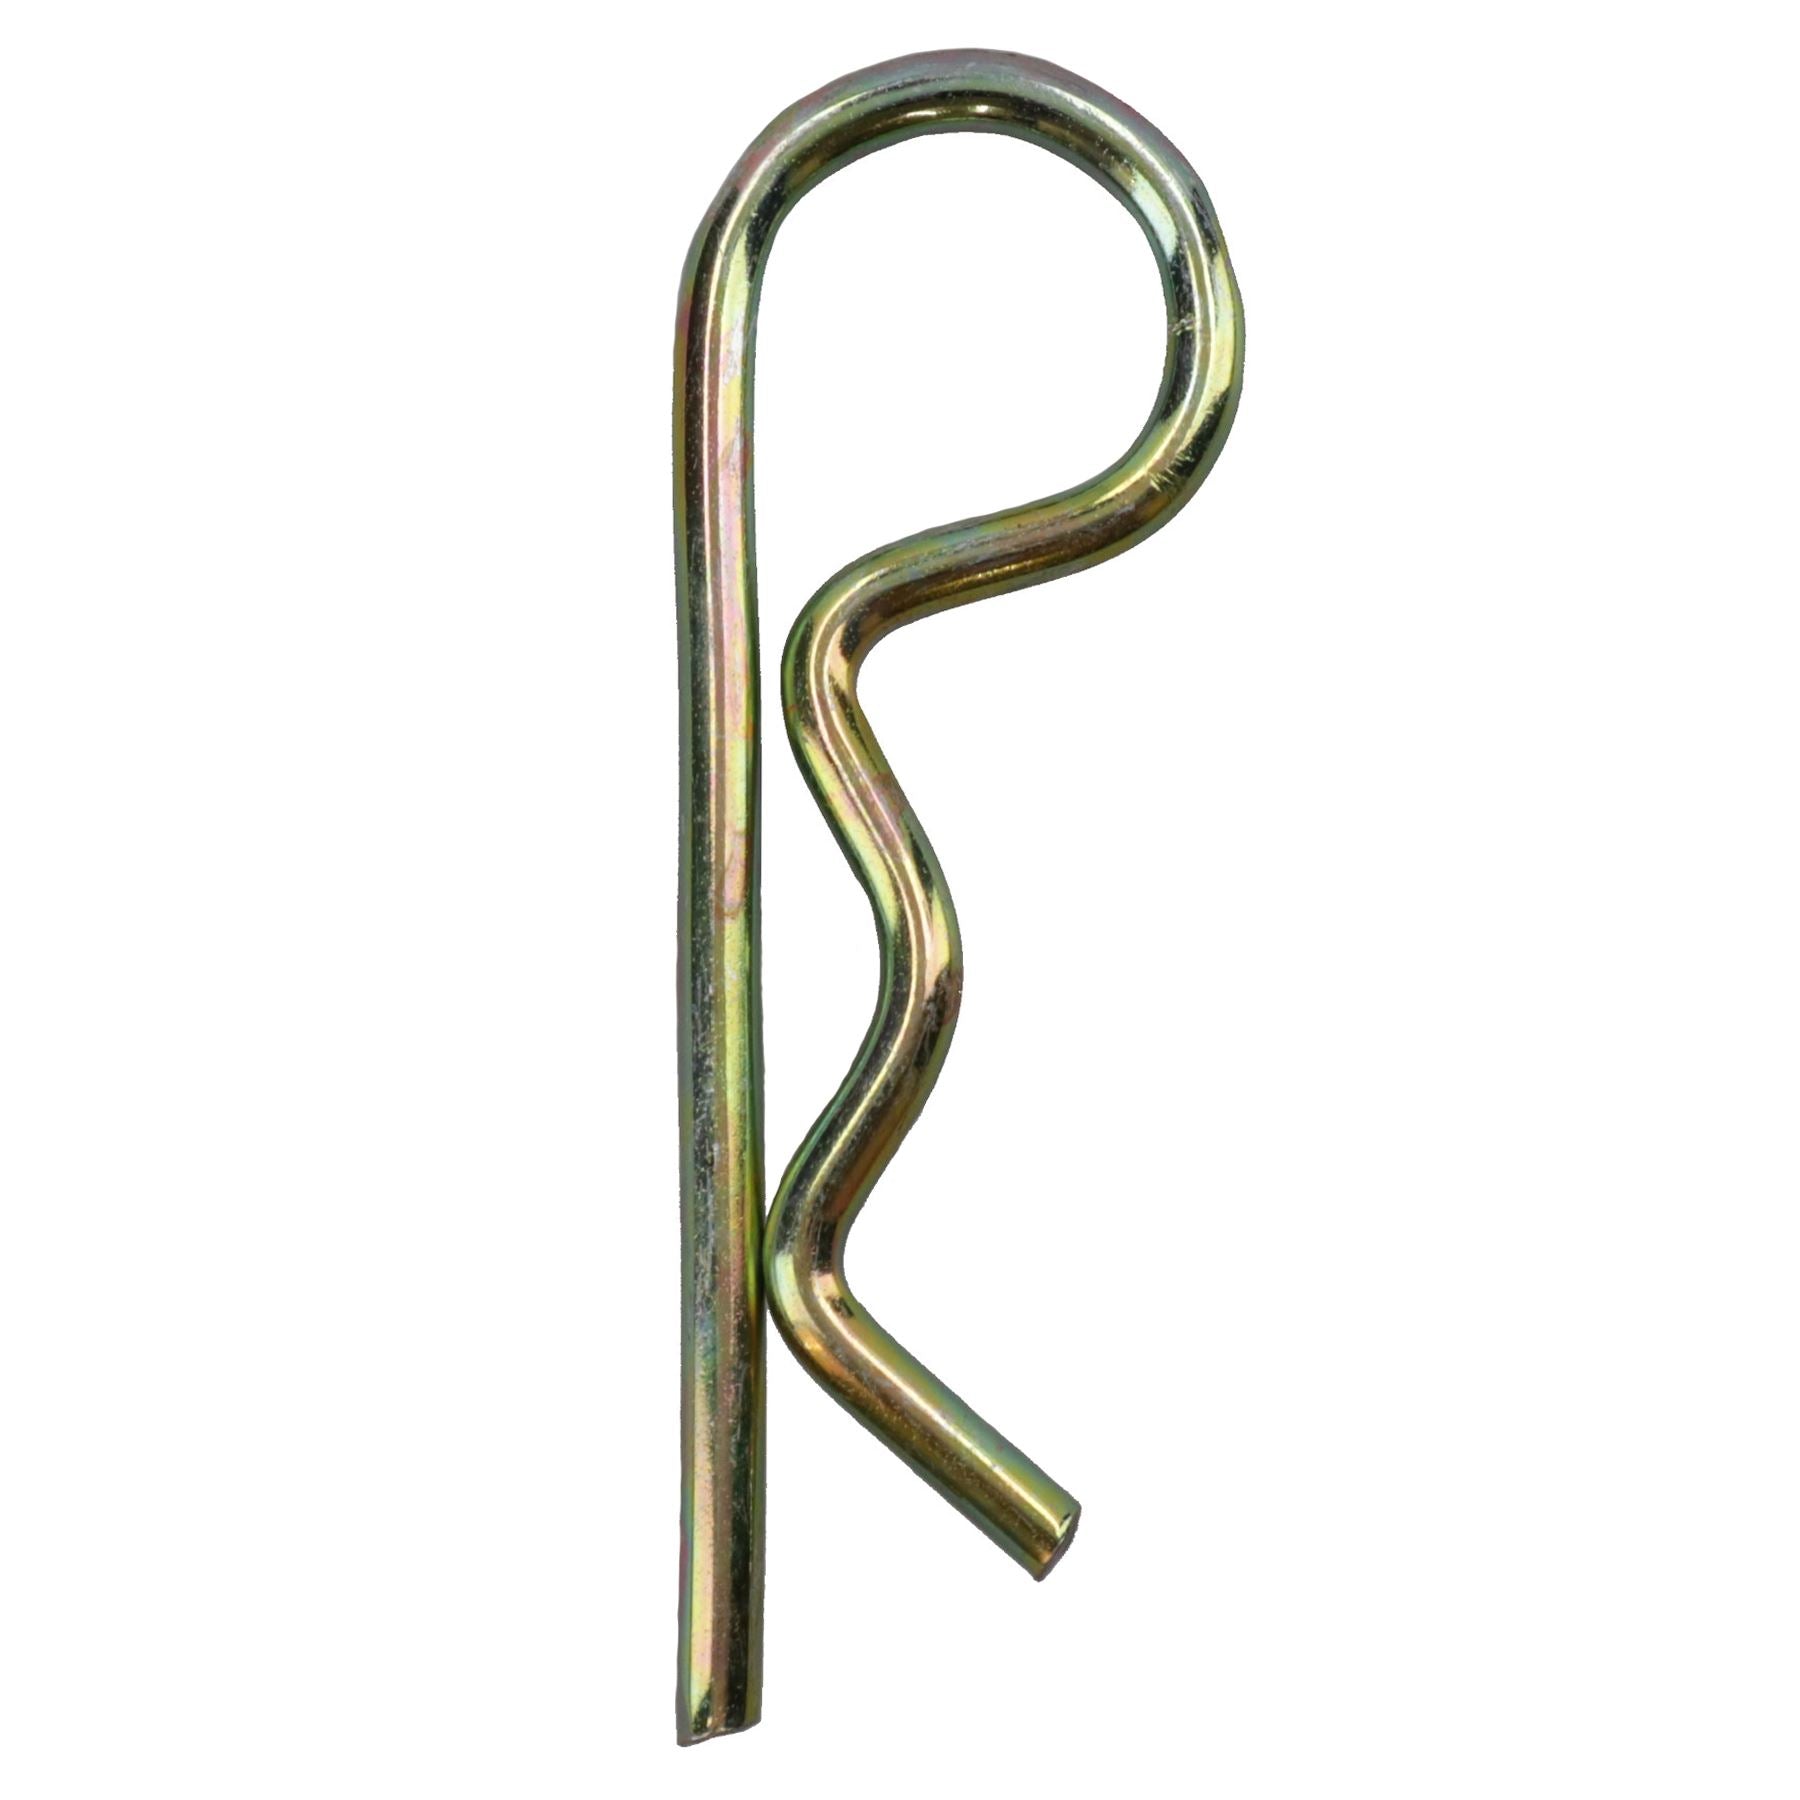 5mm R Clips Hair Pin Spring Cotter Pin Hitch Lynch Cotter Zinc Plated Steel